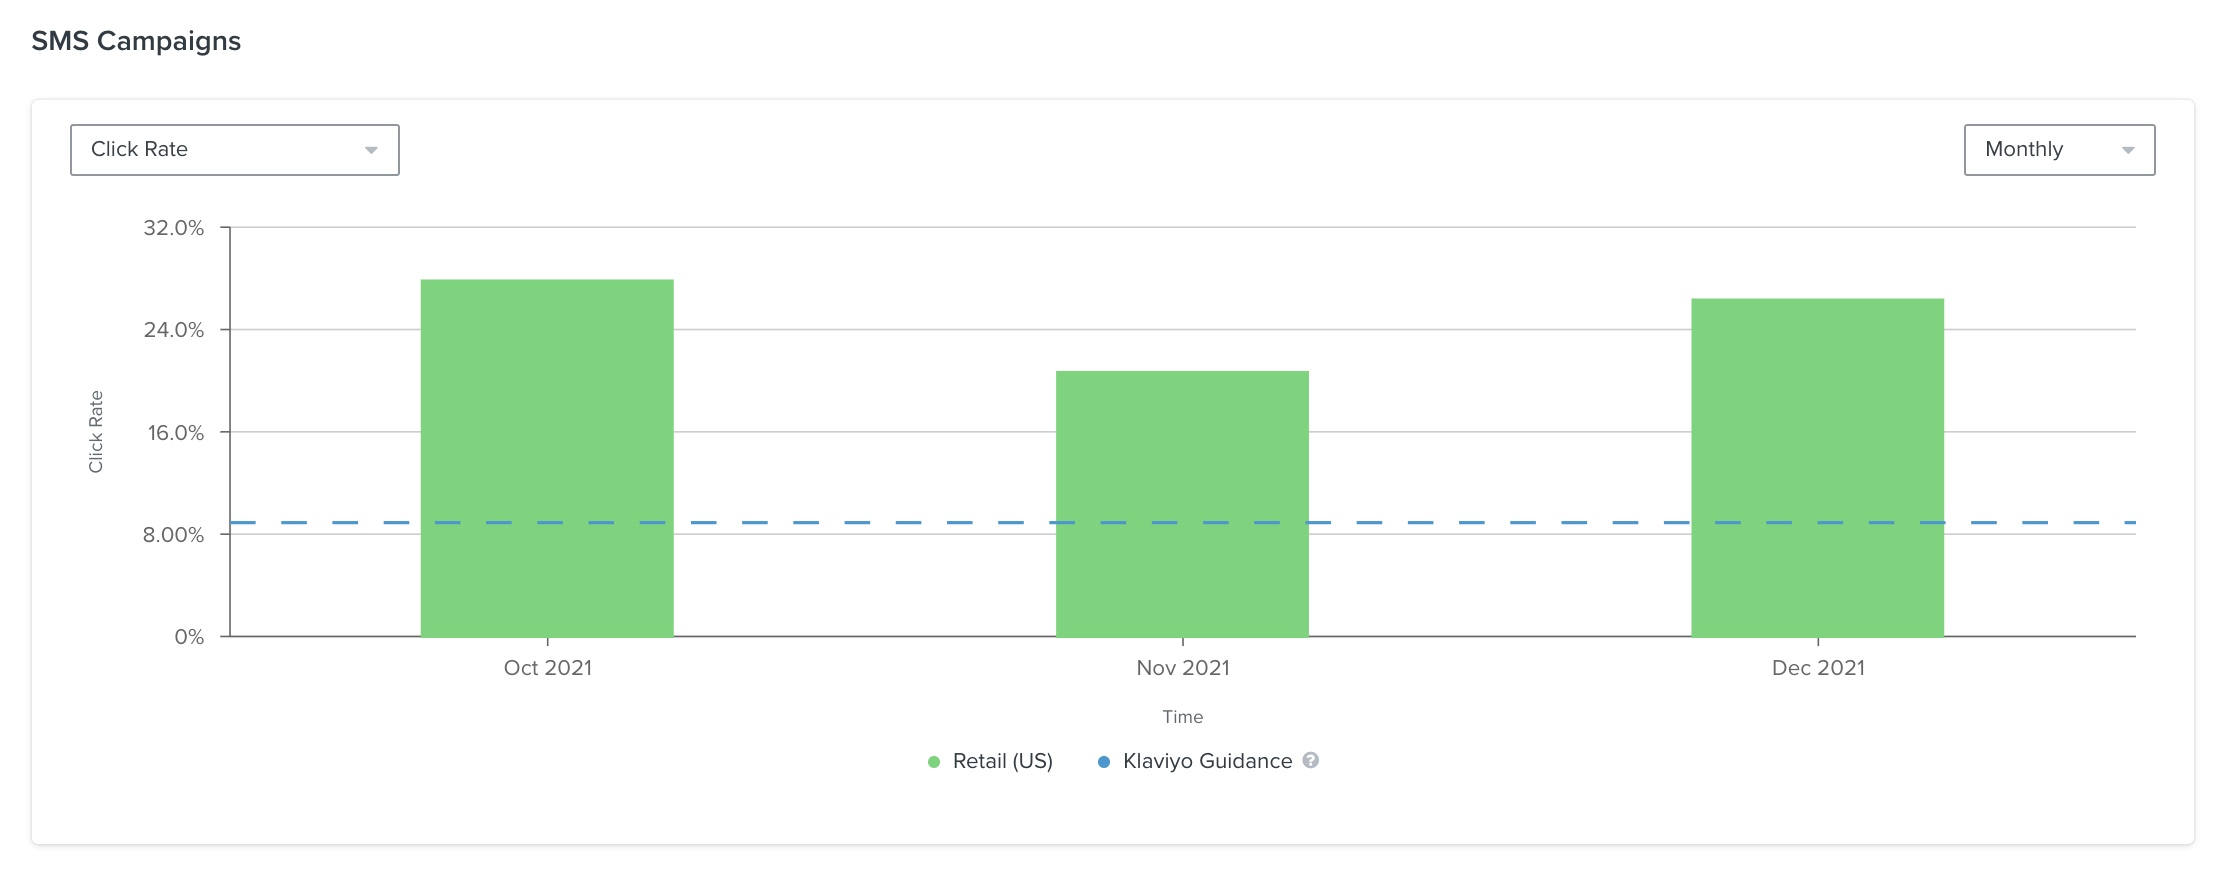 Example of a bar graph chart inside the SMS Campaign Performance page showing click rate data monthly